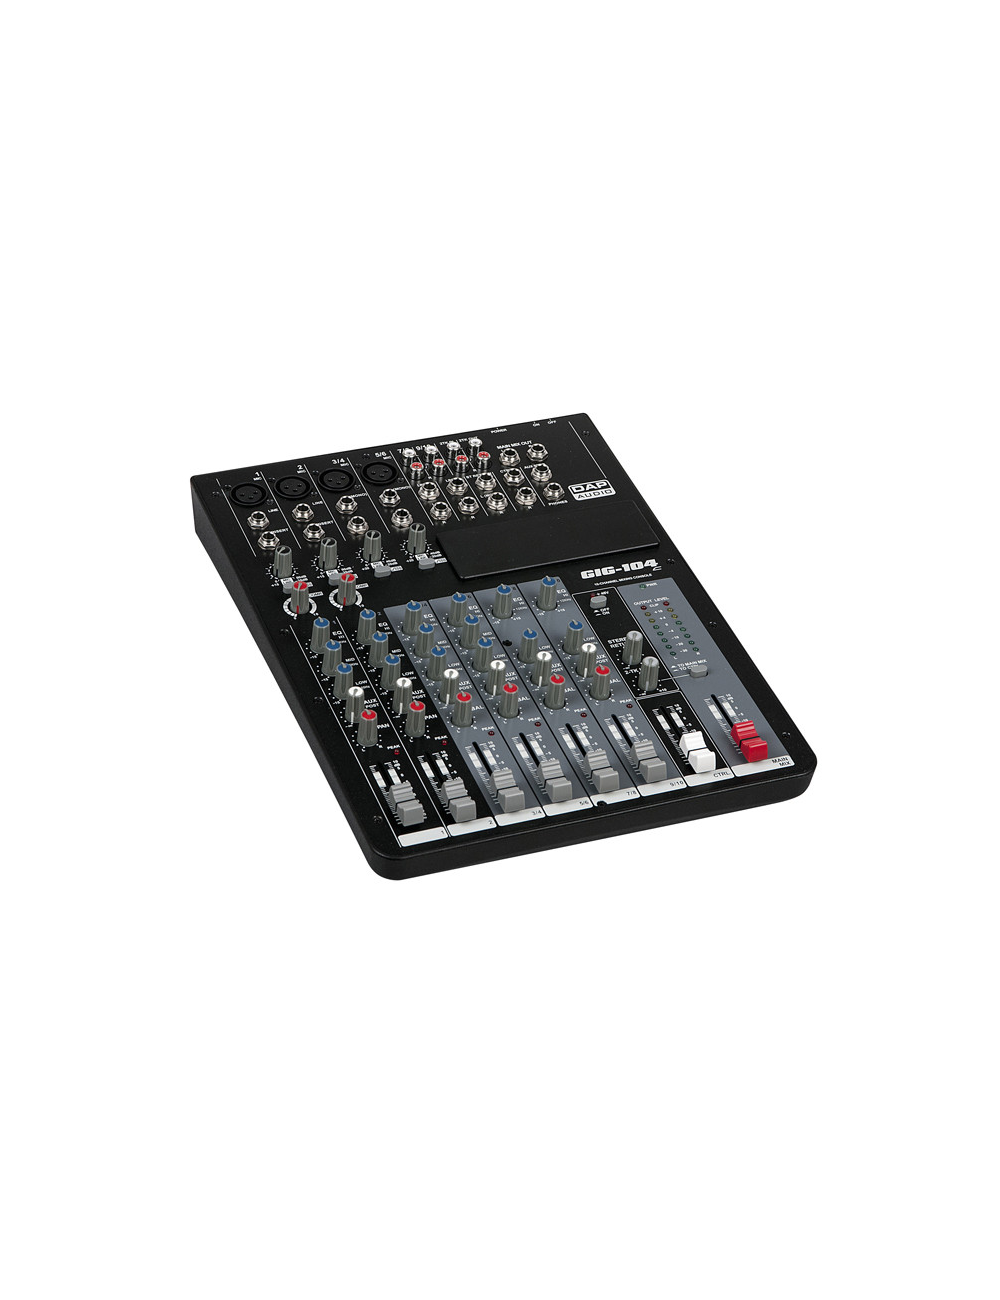 GIG-104C 10-channel mixer